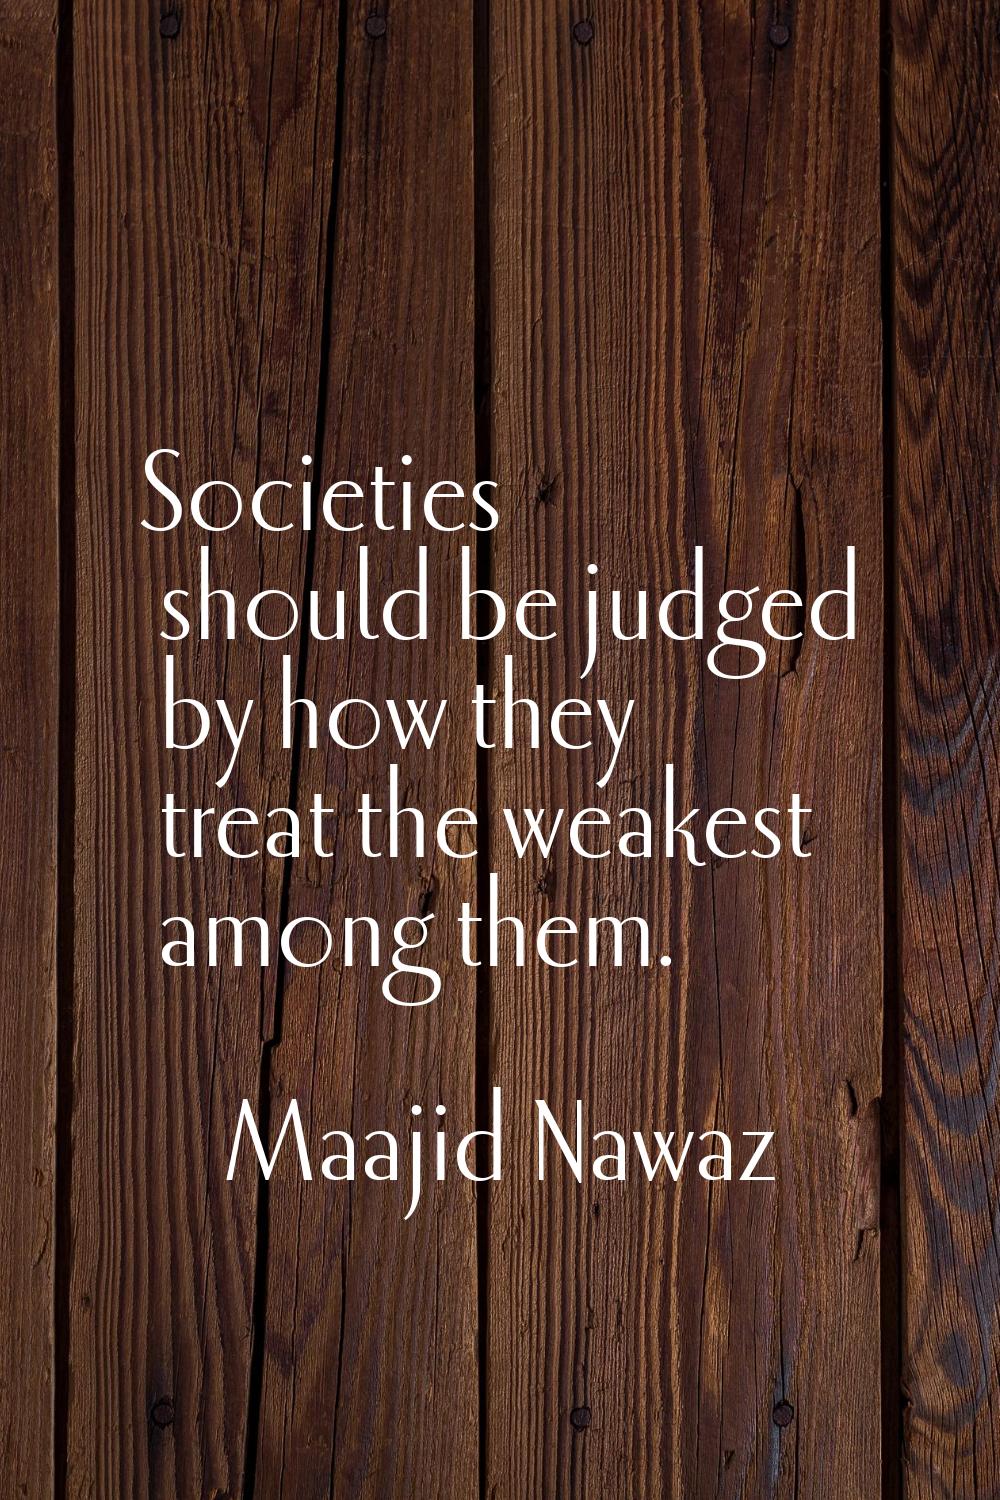 Societies should be judged by how they treat the weakest among them.